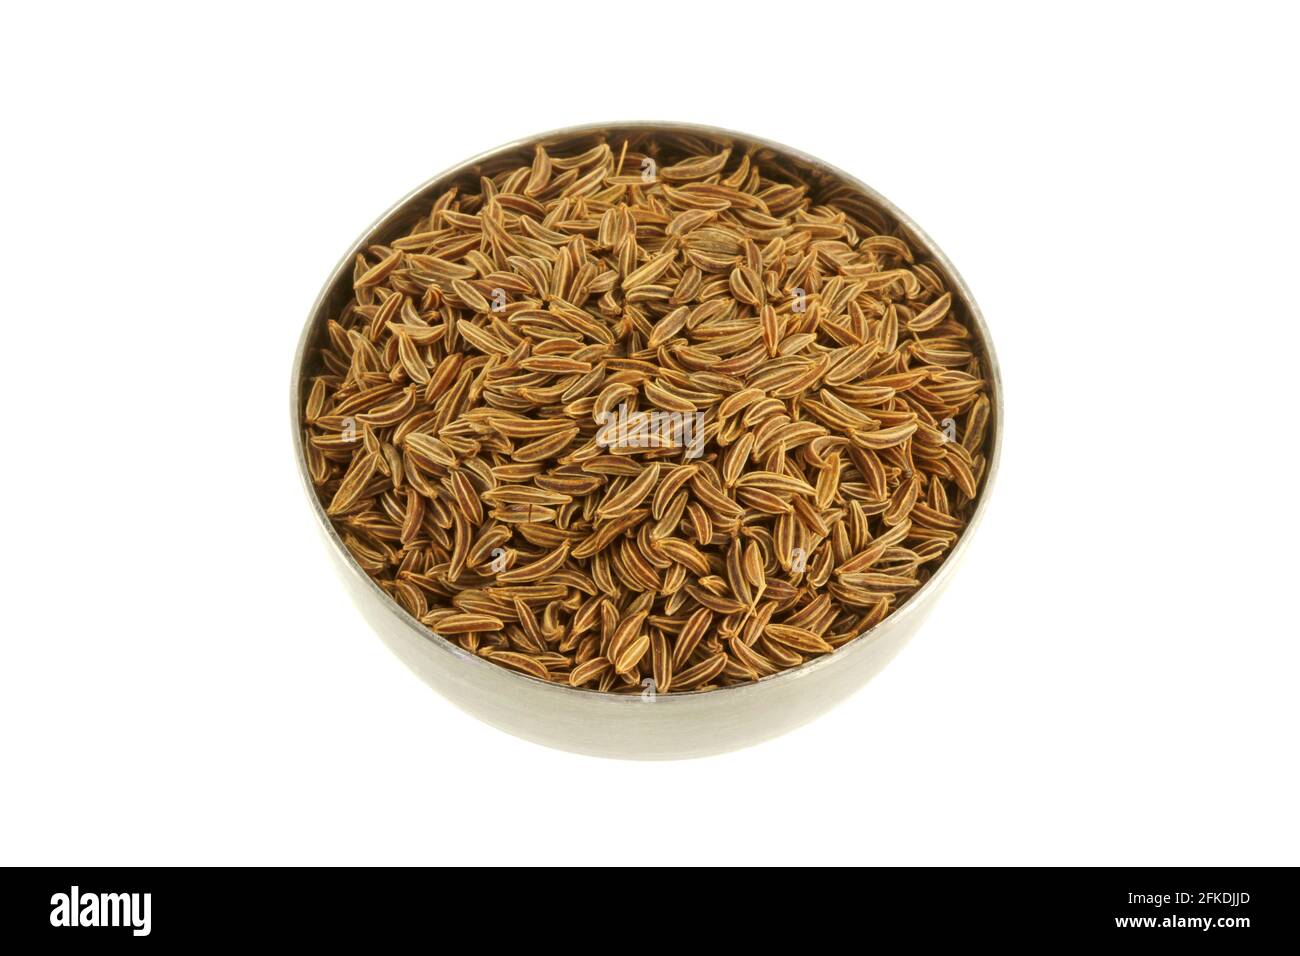 Closeup photo of a bowl of dried aromatic herb Caraway seeds Stock Photo